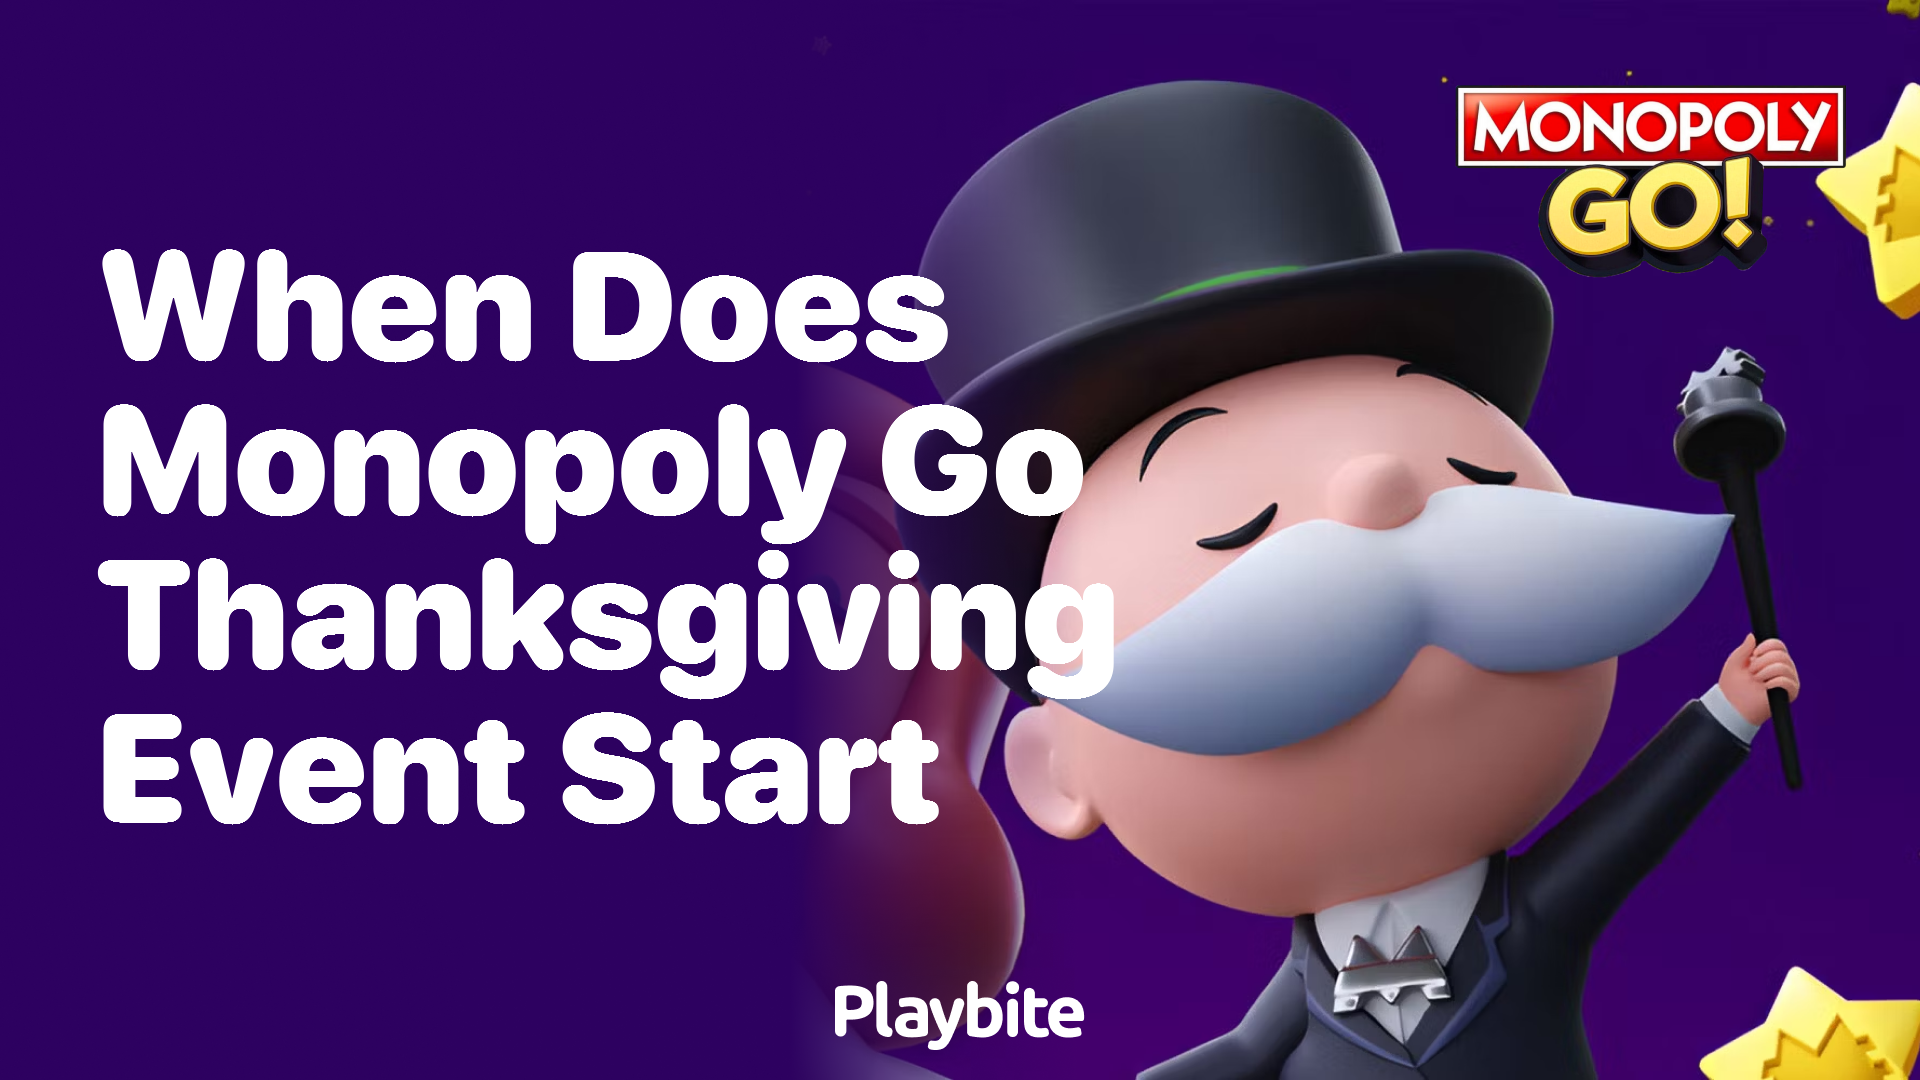 When Does the Monopoly Go Thanksgiving Event Start?